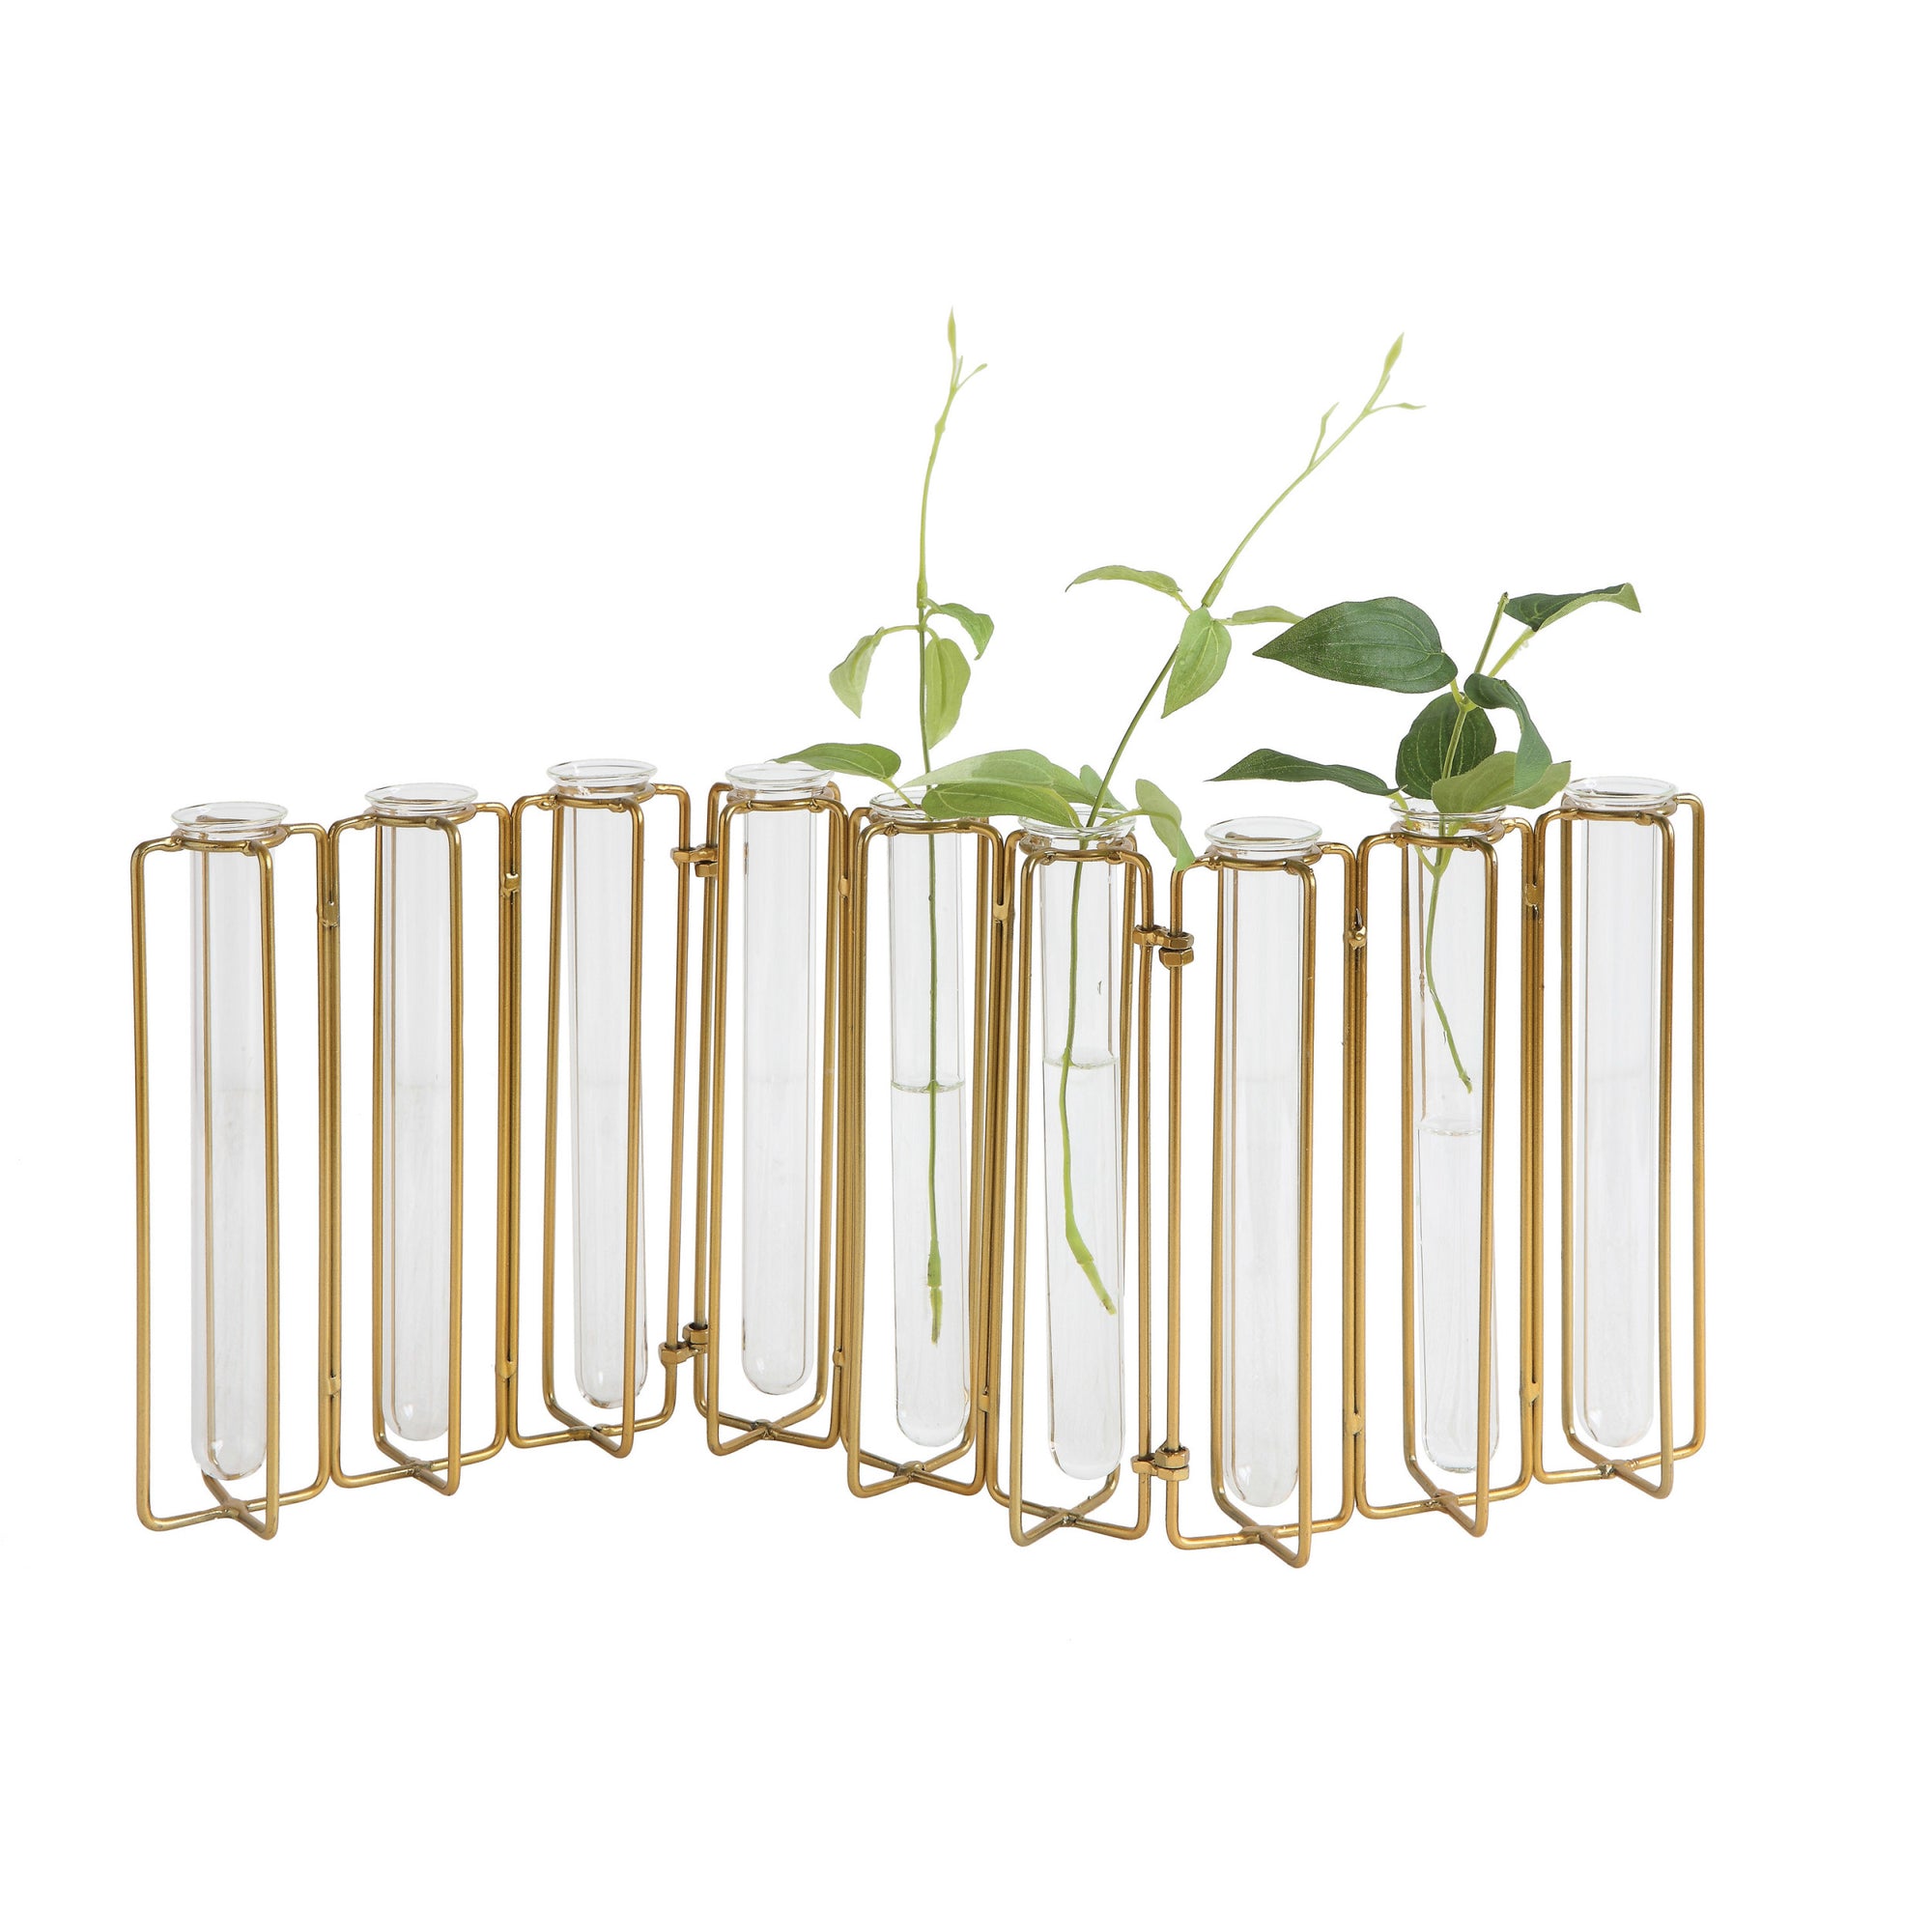 Metal and Glass Jointed Vase with 9 Test Tubes